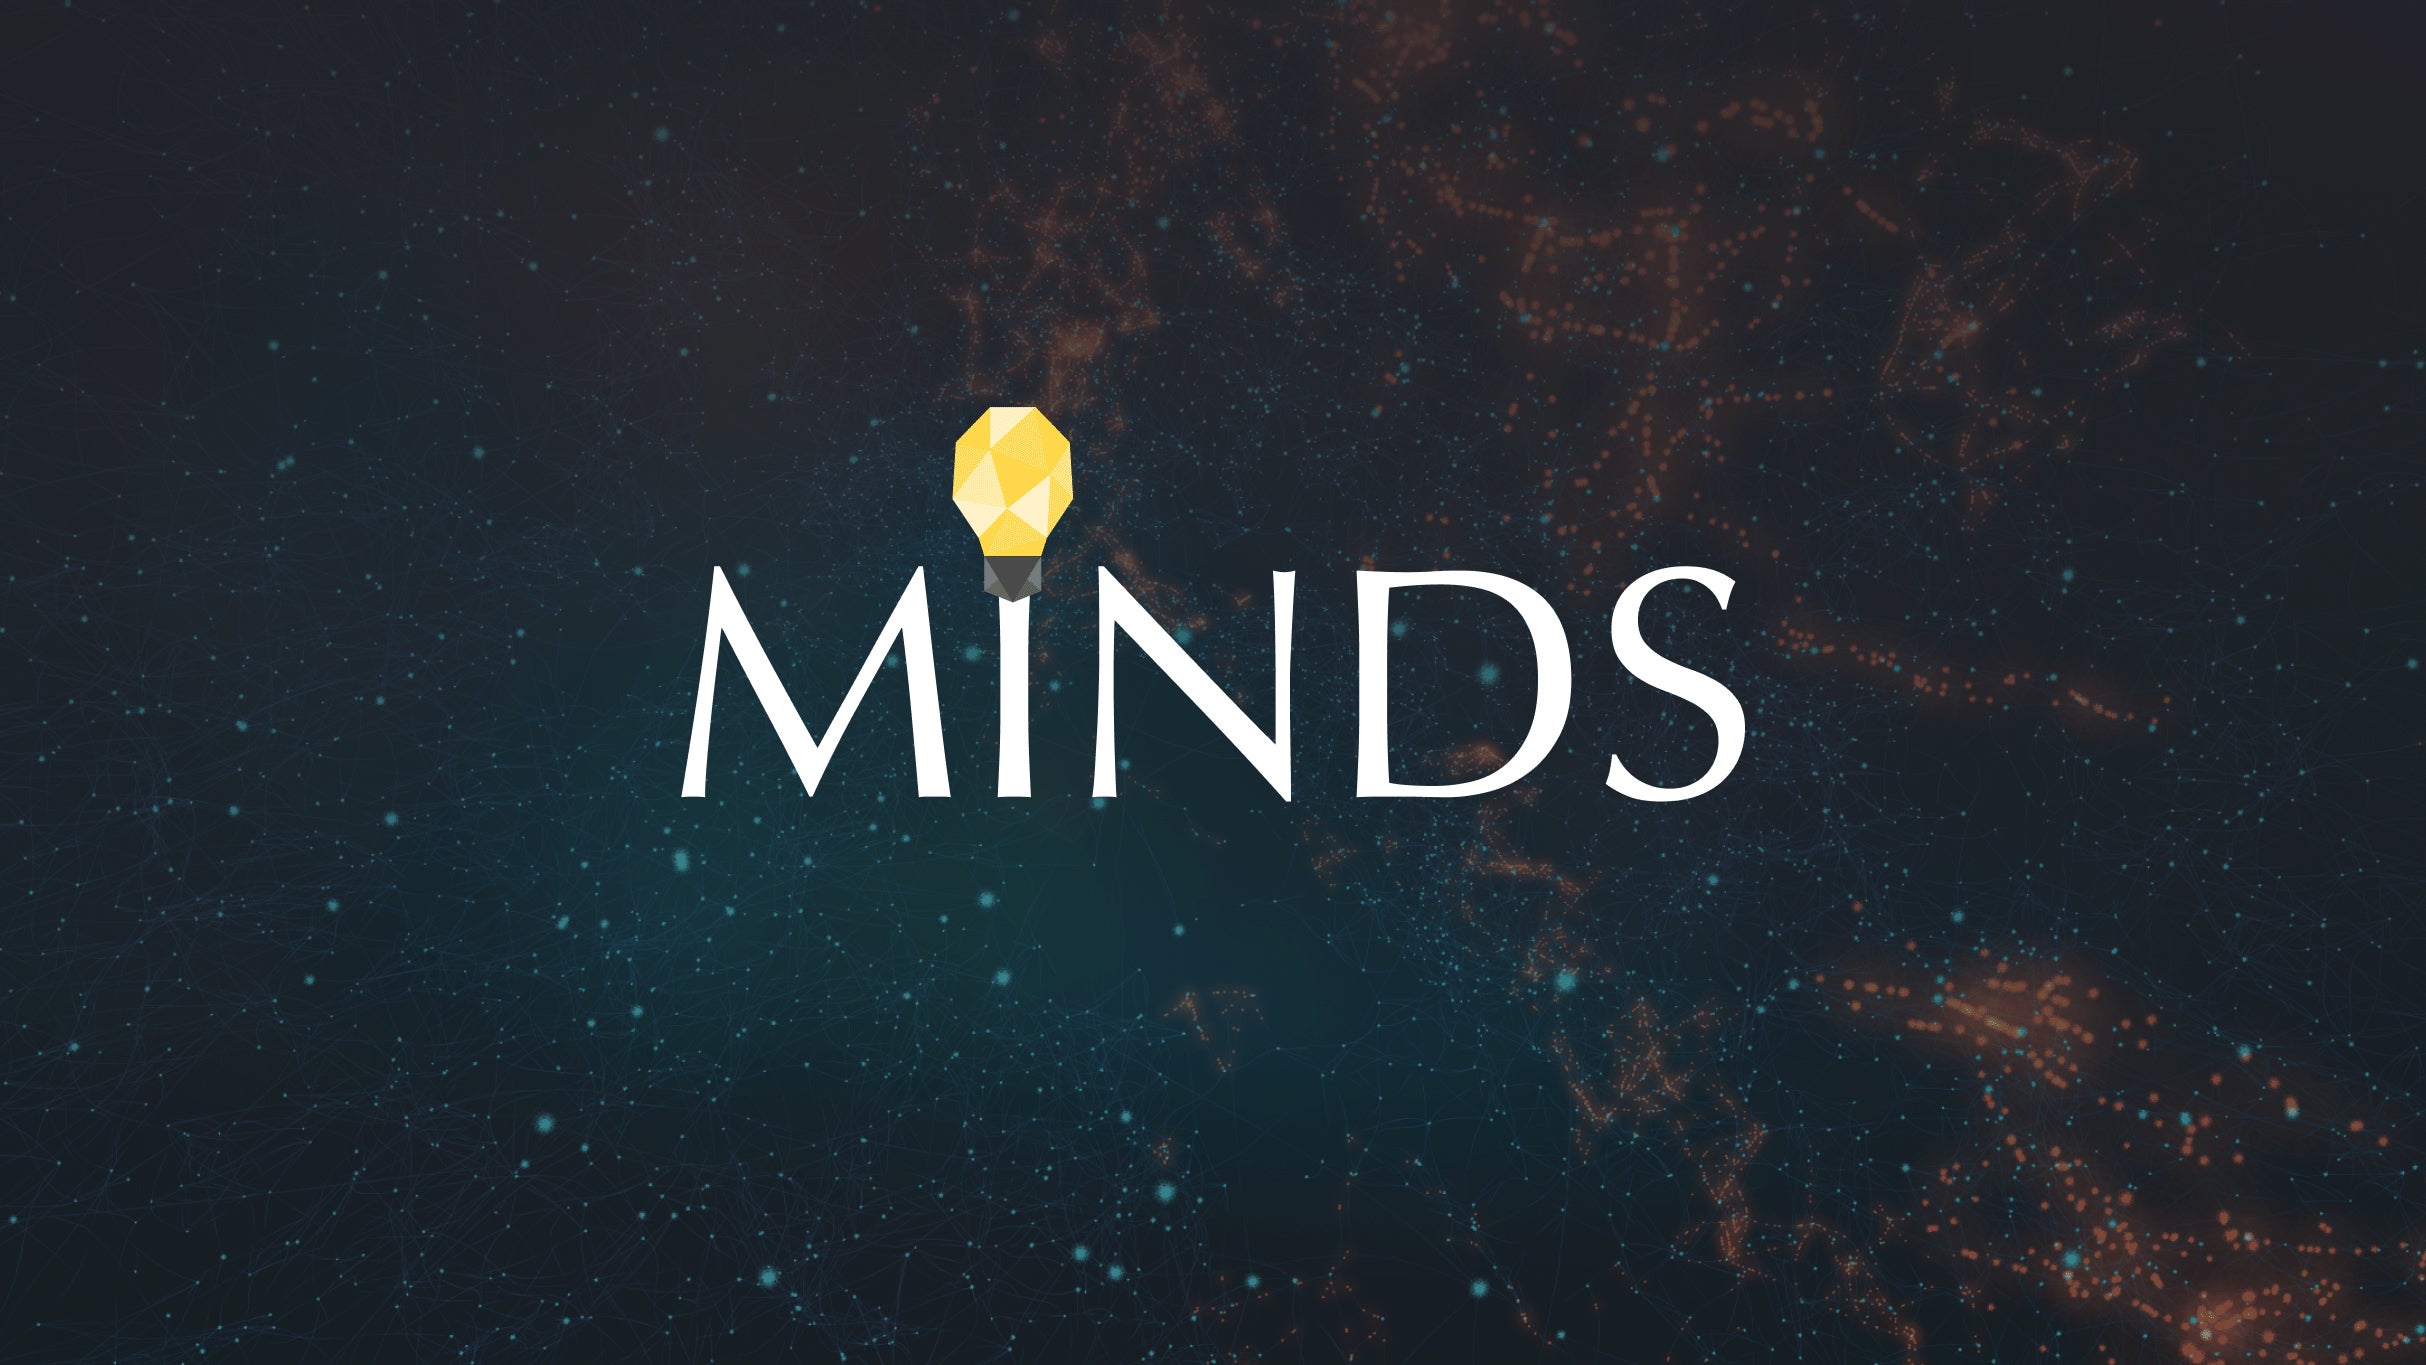 Minds: Festival of Ideas